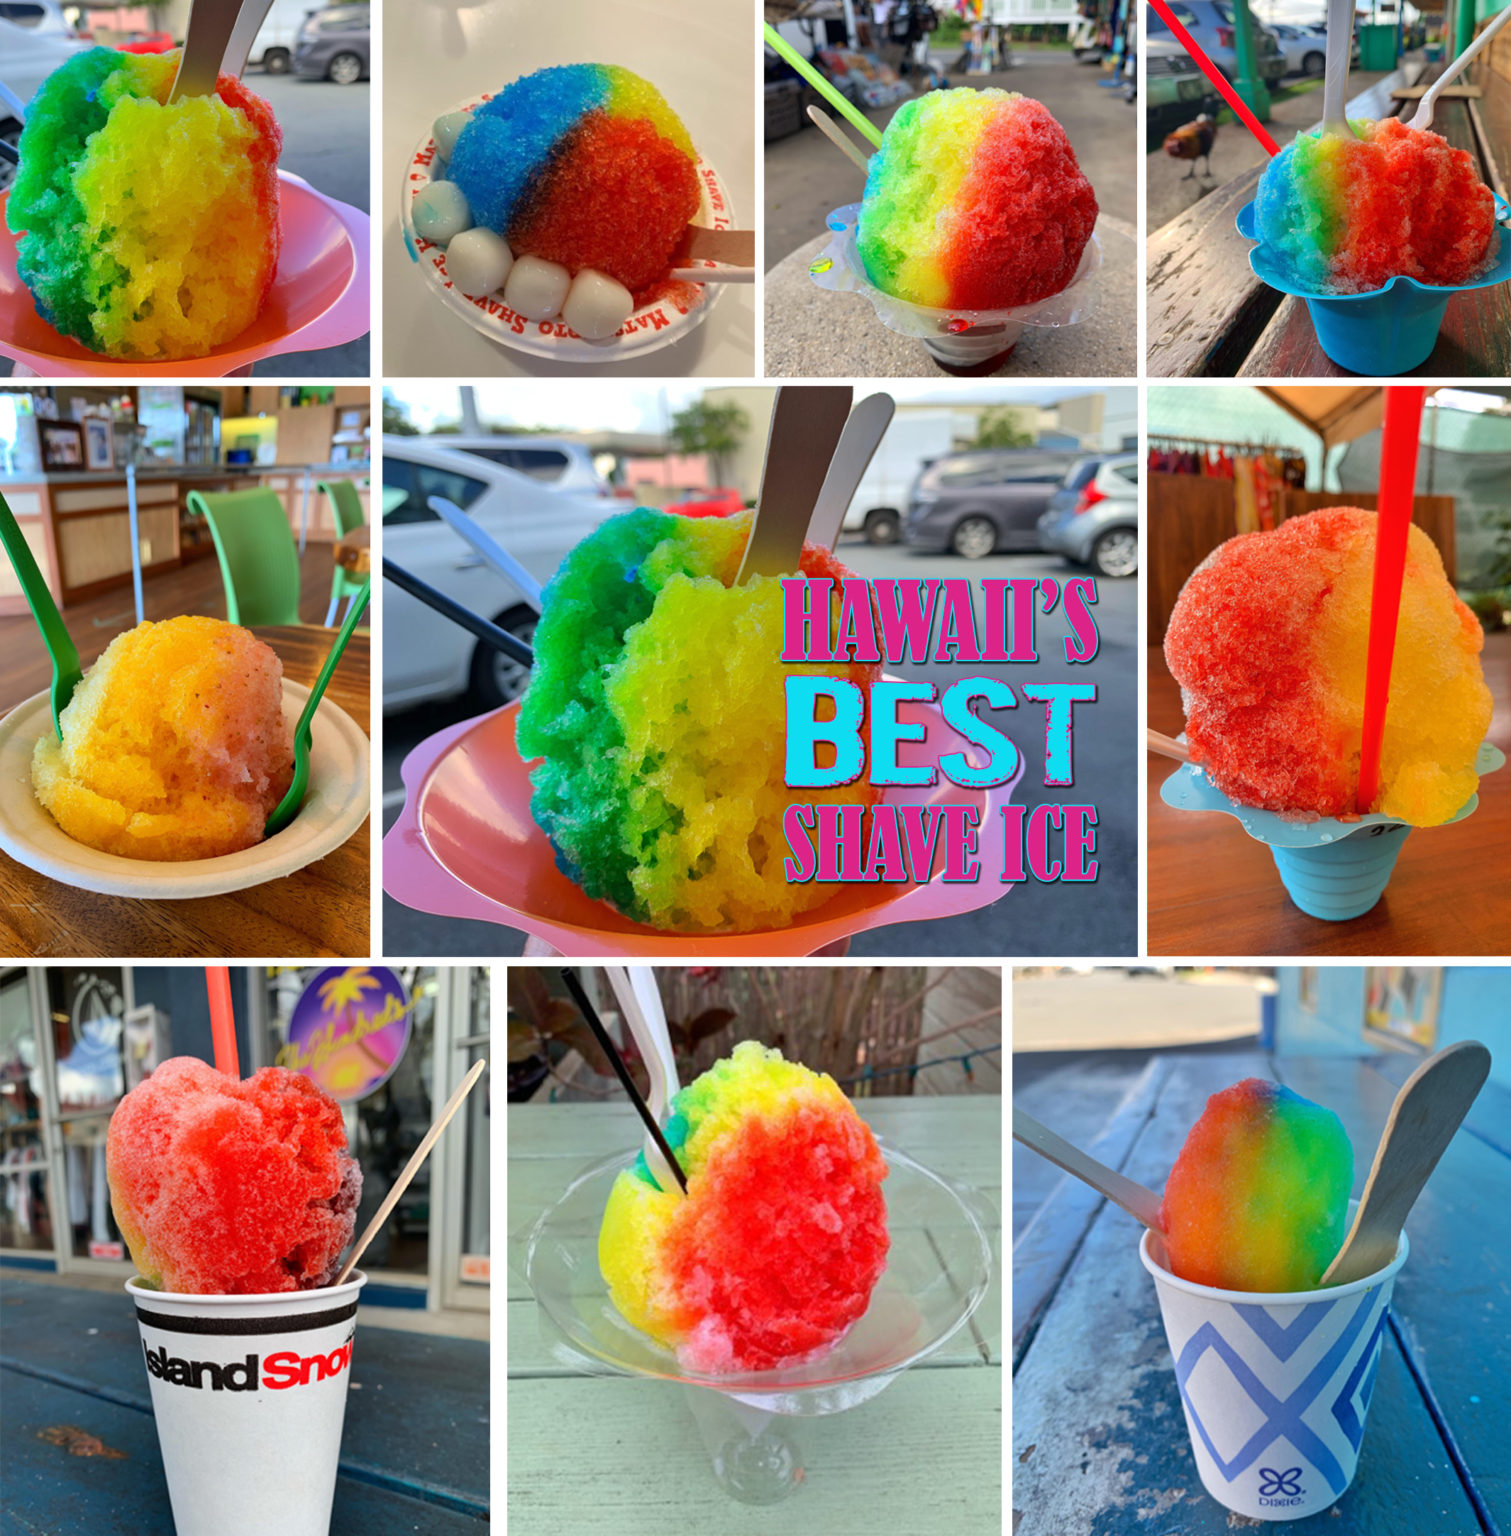 HAWAIIs BEST SHAVE ICE Living The Aloha Life Podcasting On Life In Hawaii